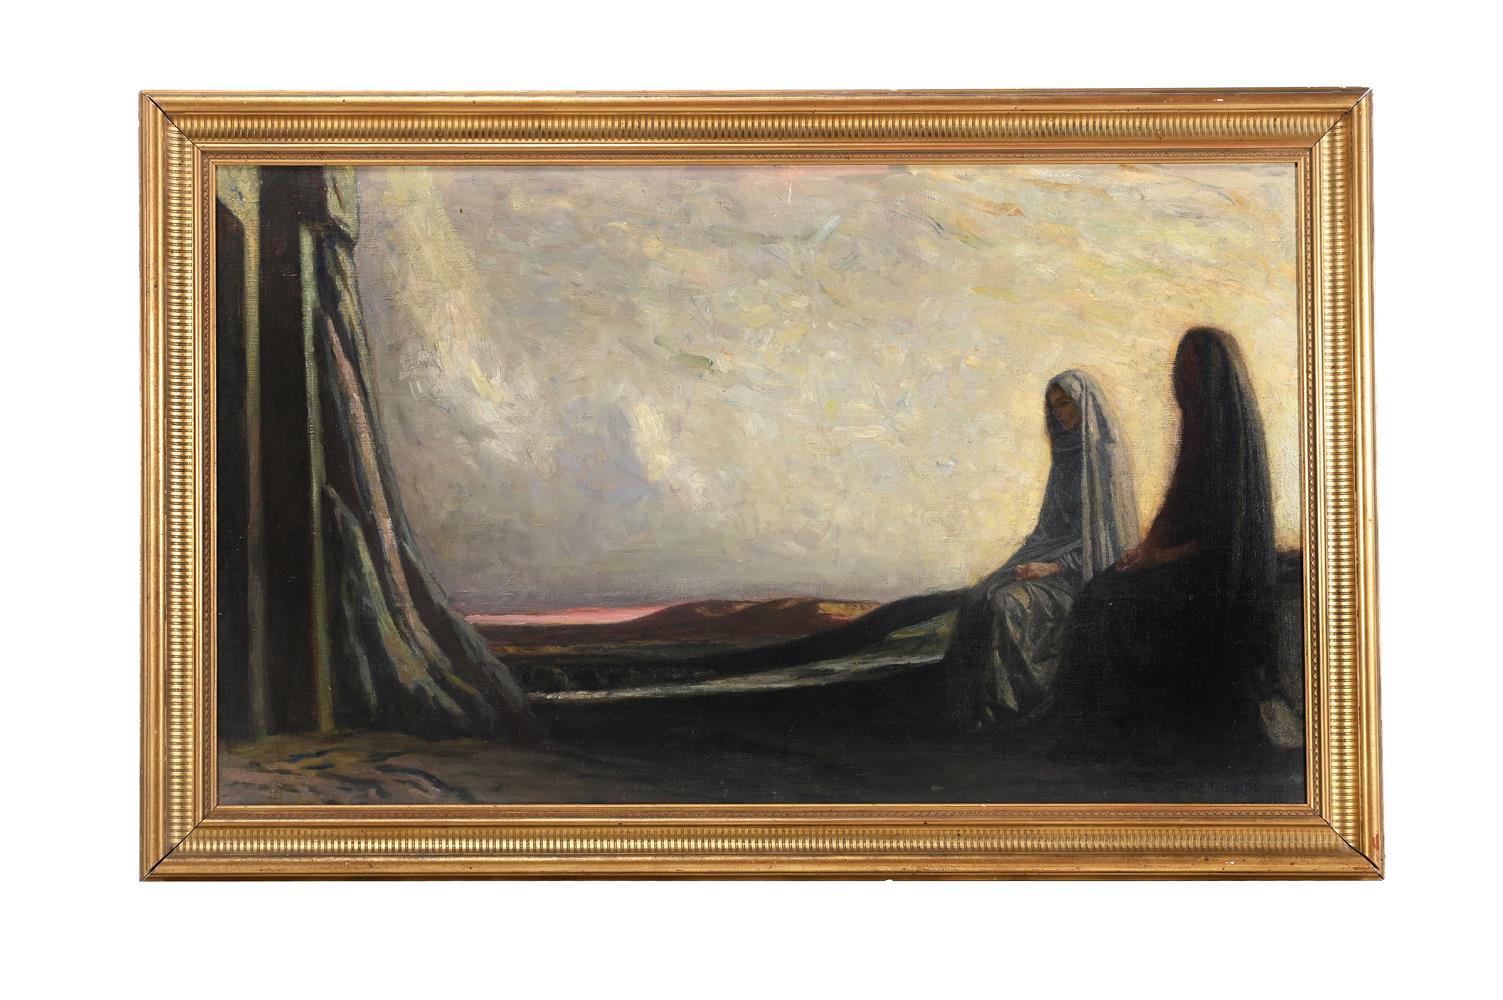 ROBERT ANNING BELL (BRITISH 1863-1933), TWO VEILED WOMEN IN A LANDSCAPE - Image 2 of 3